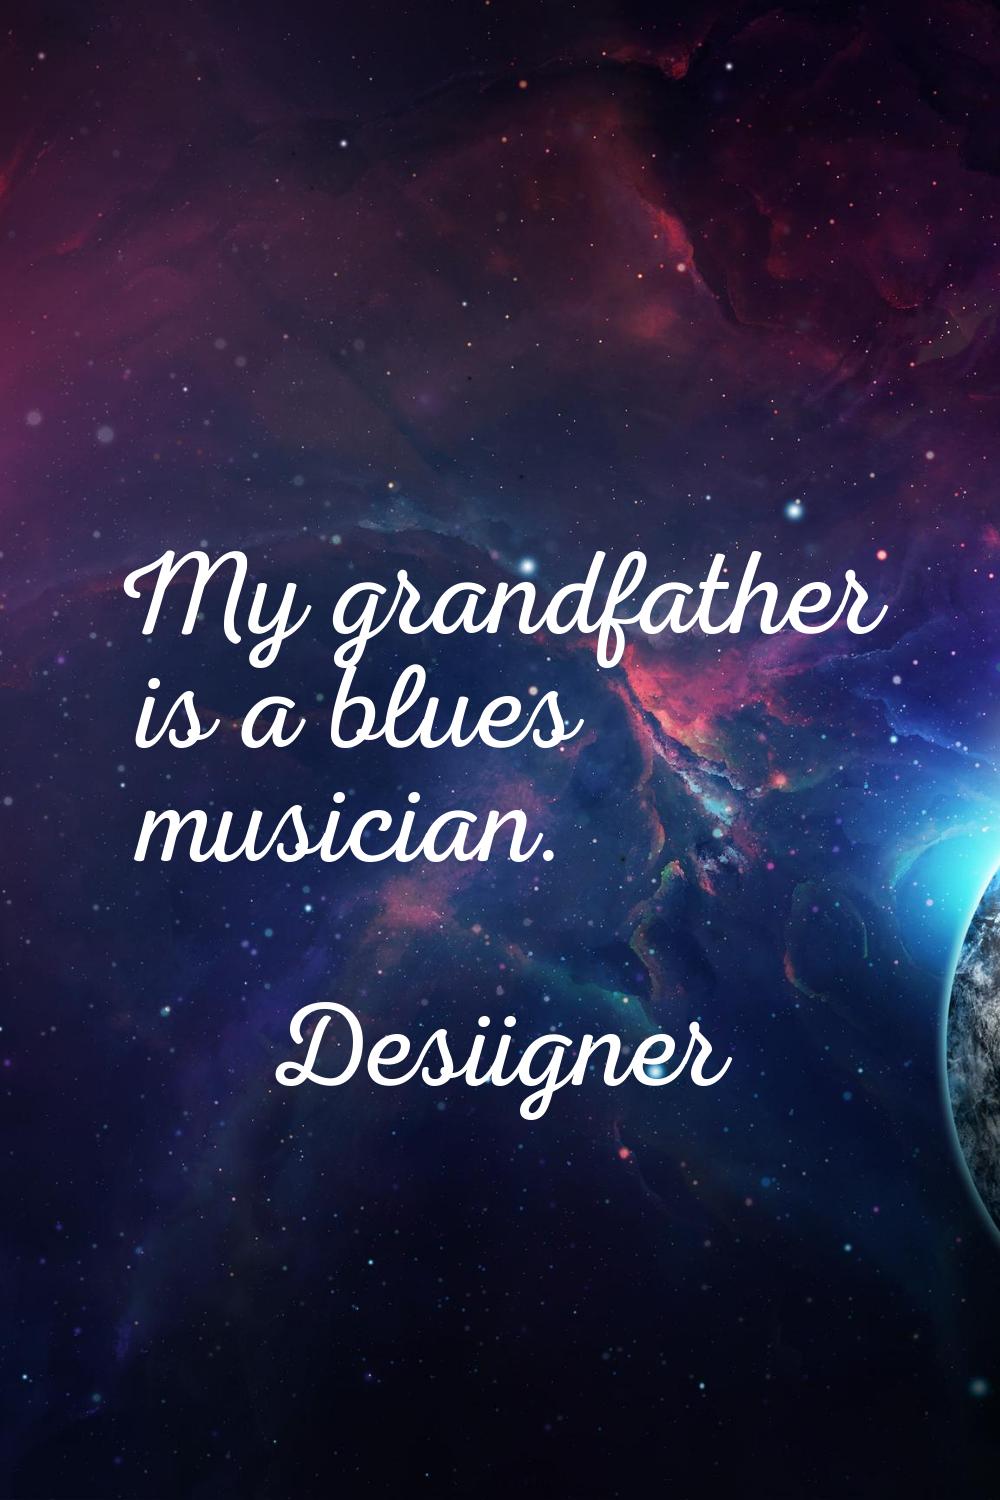 My grandfather is a blues musician.